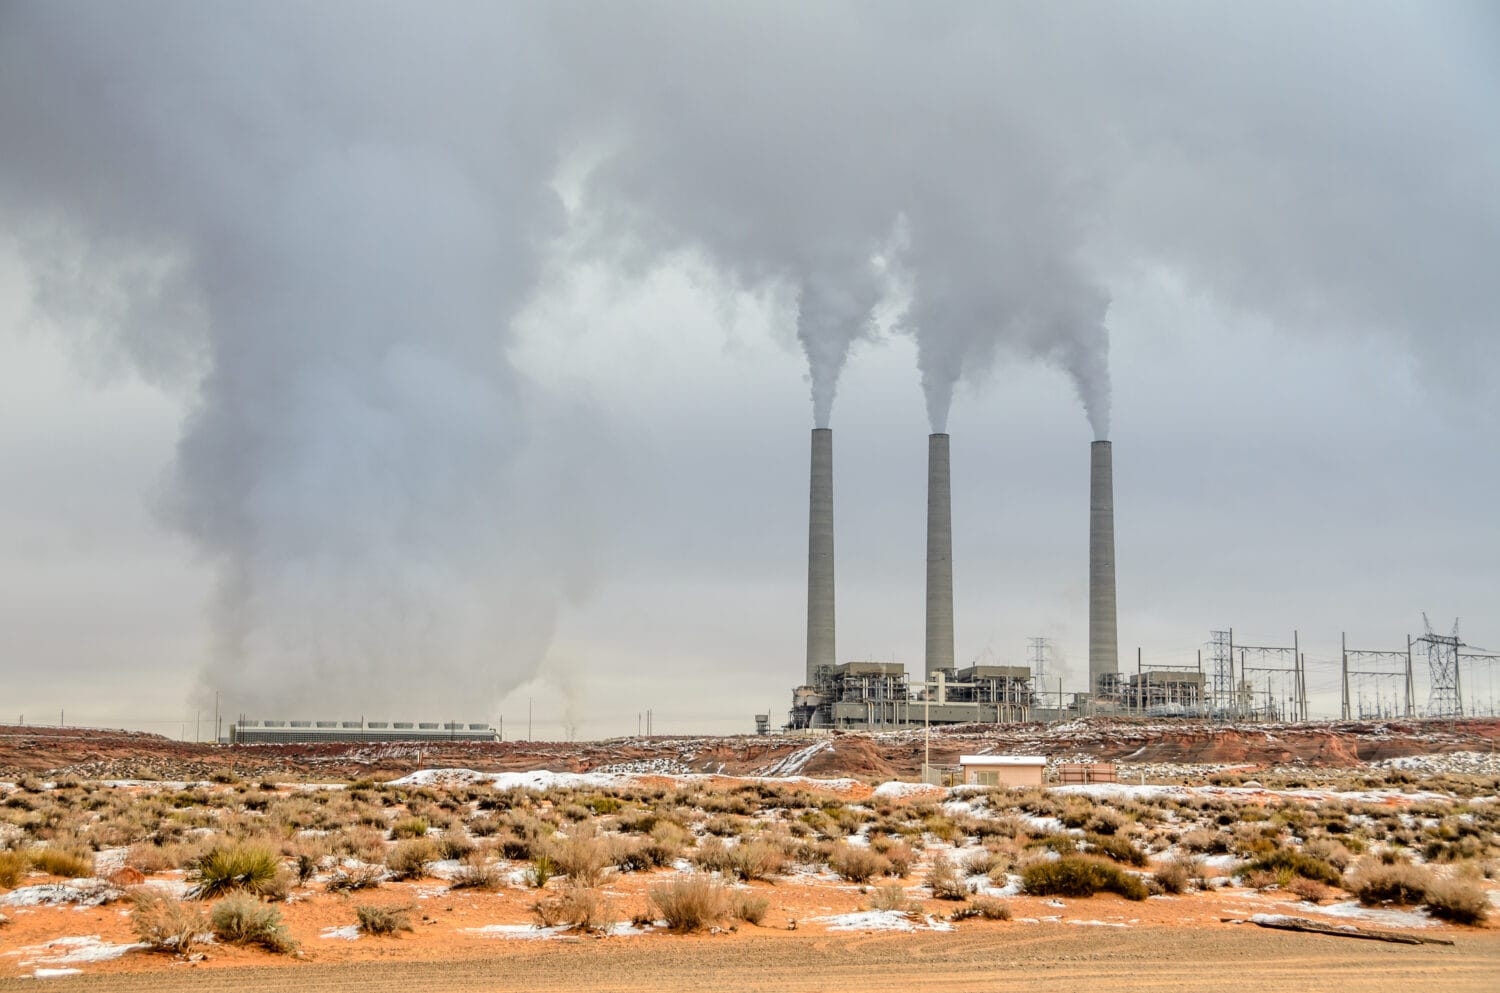 View of smoking smoke stacks of a generating station at the Navajo reservation, Arizona, USA. Desert landscape violated by an air polluting power plant, smog and gloomy sky. Polluting energy source.